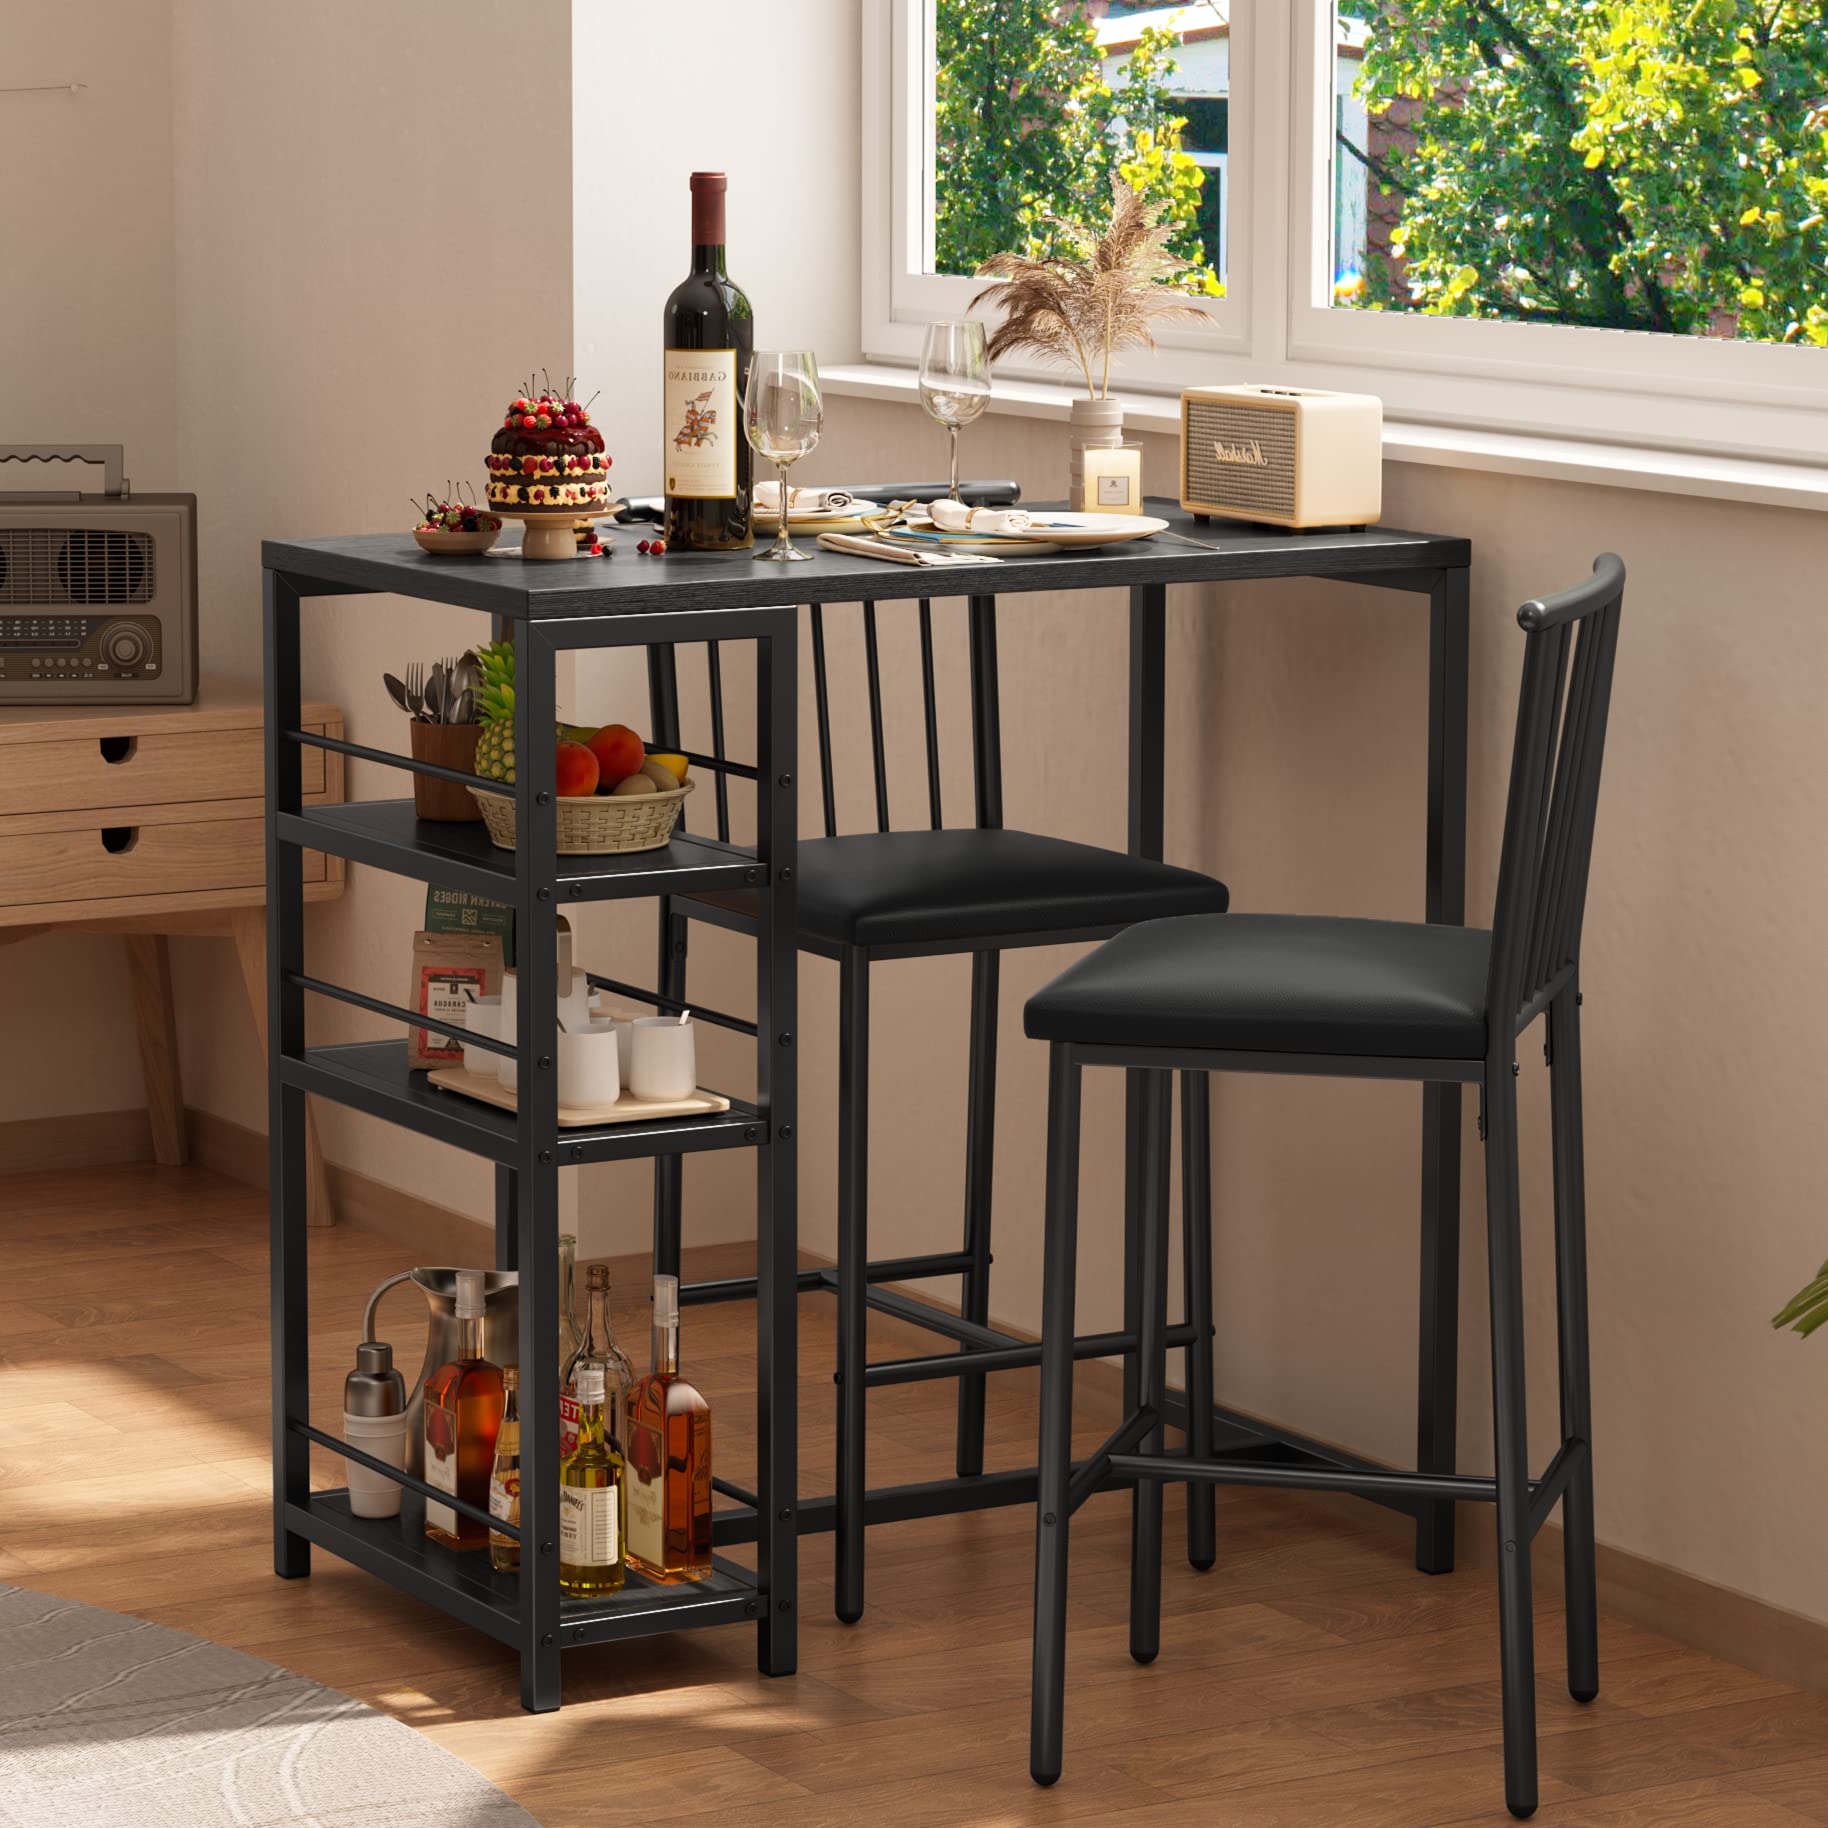 Gizoon TB51 Bar Table and Chairs Set for 2 with 3 Storage Shelves